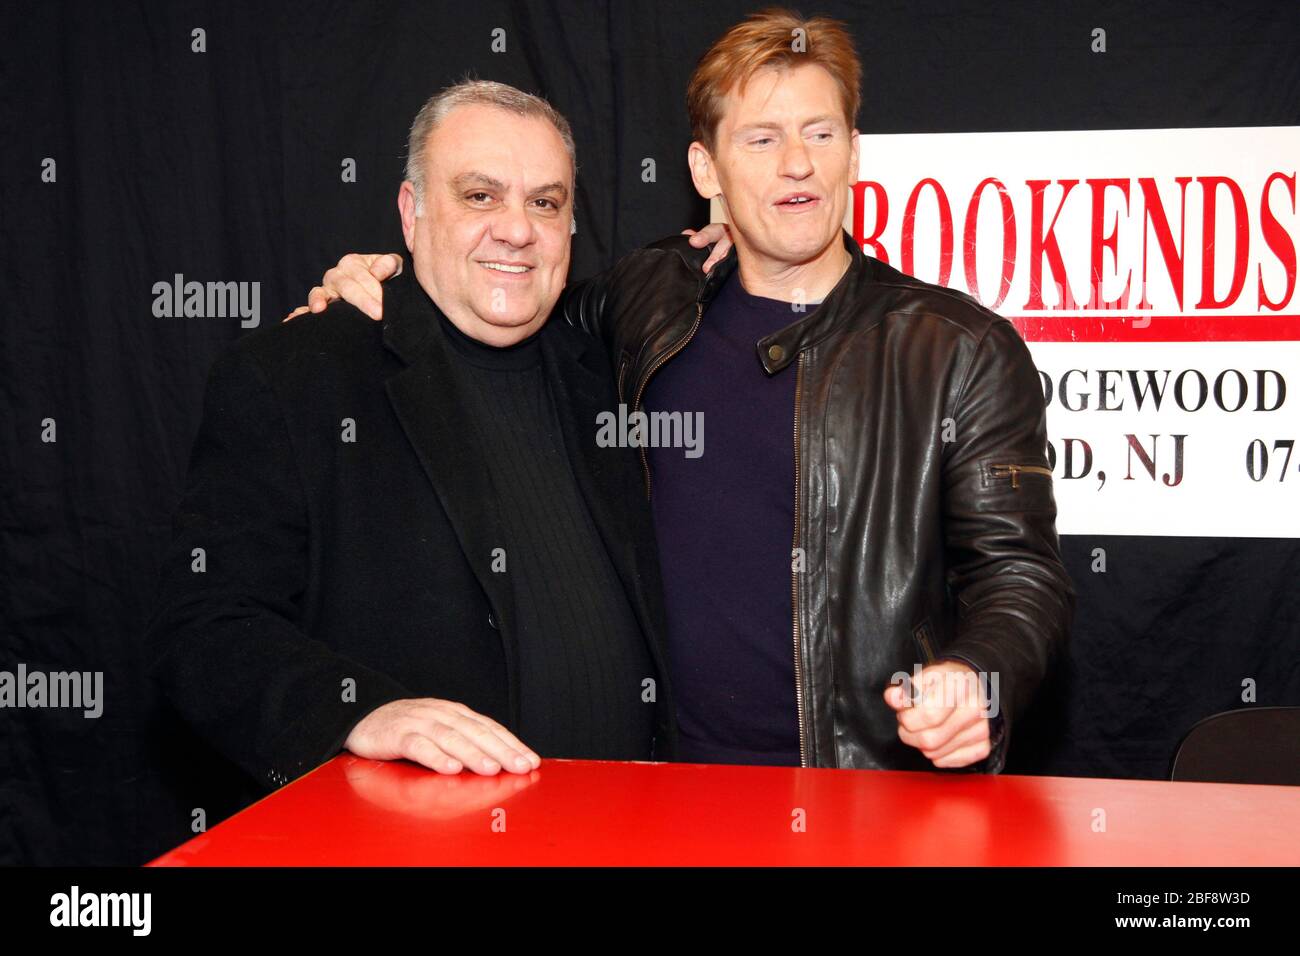 Denis Leary pictured with Vincent Curatola, Johnny Sack from The Sopranos, at Leary's book signing for Suck on This Year at Bookends in Ridgewood, NJ on December 6, 2010    Credit: Scott Weiner / MediaPunch Stock Photo